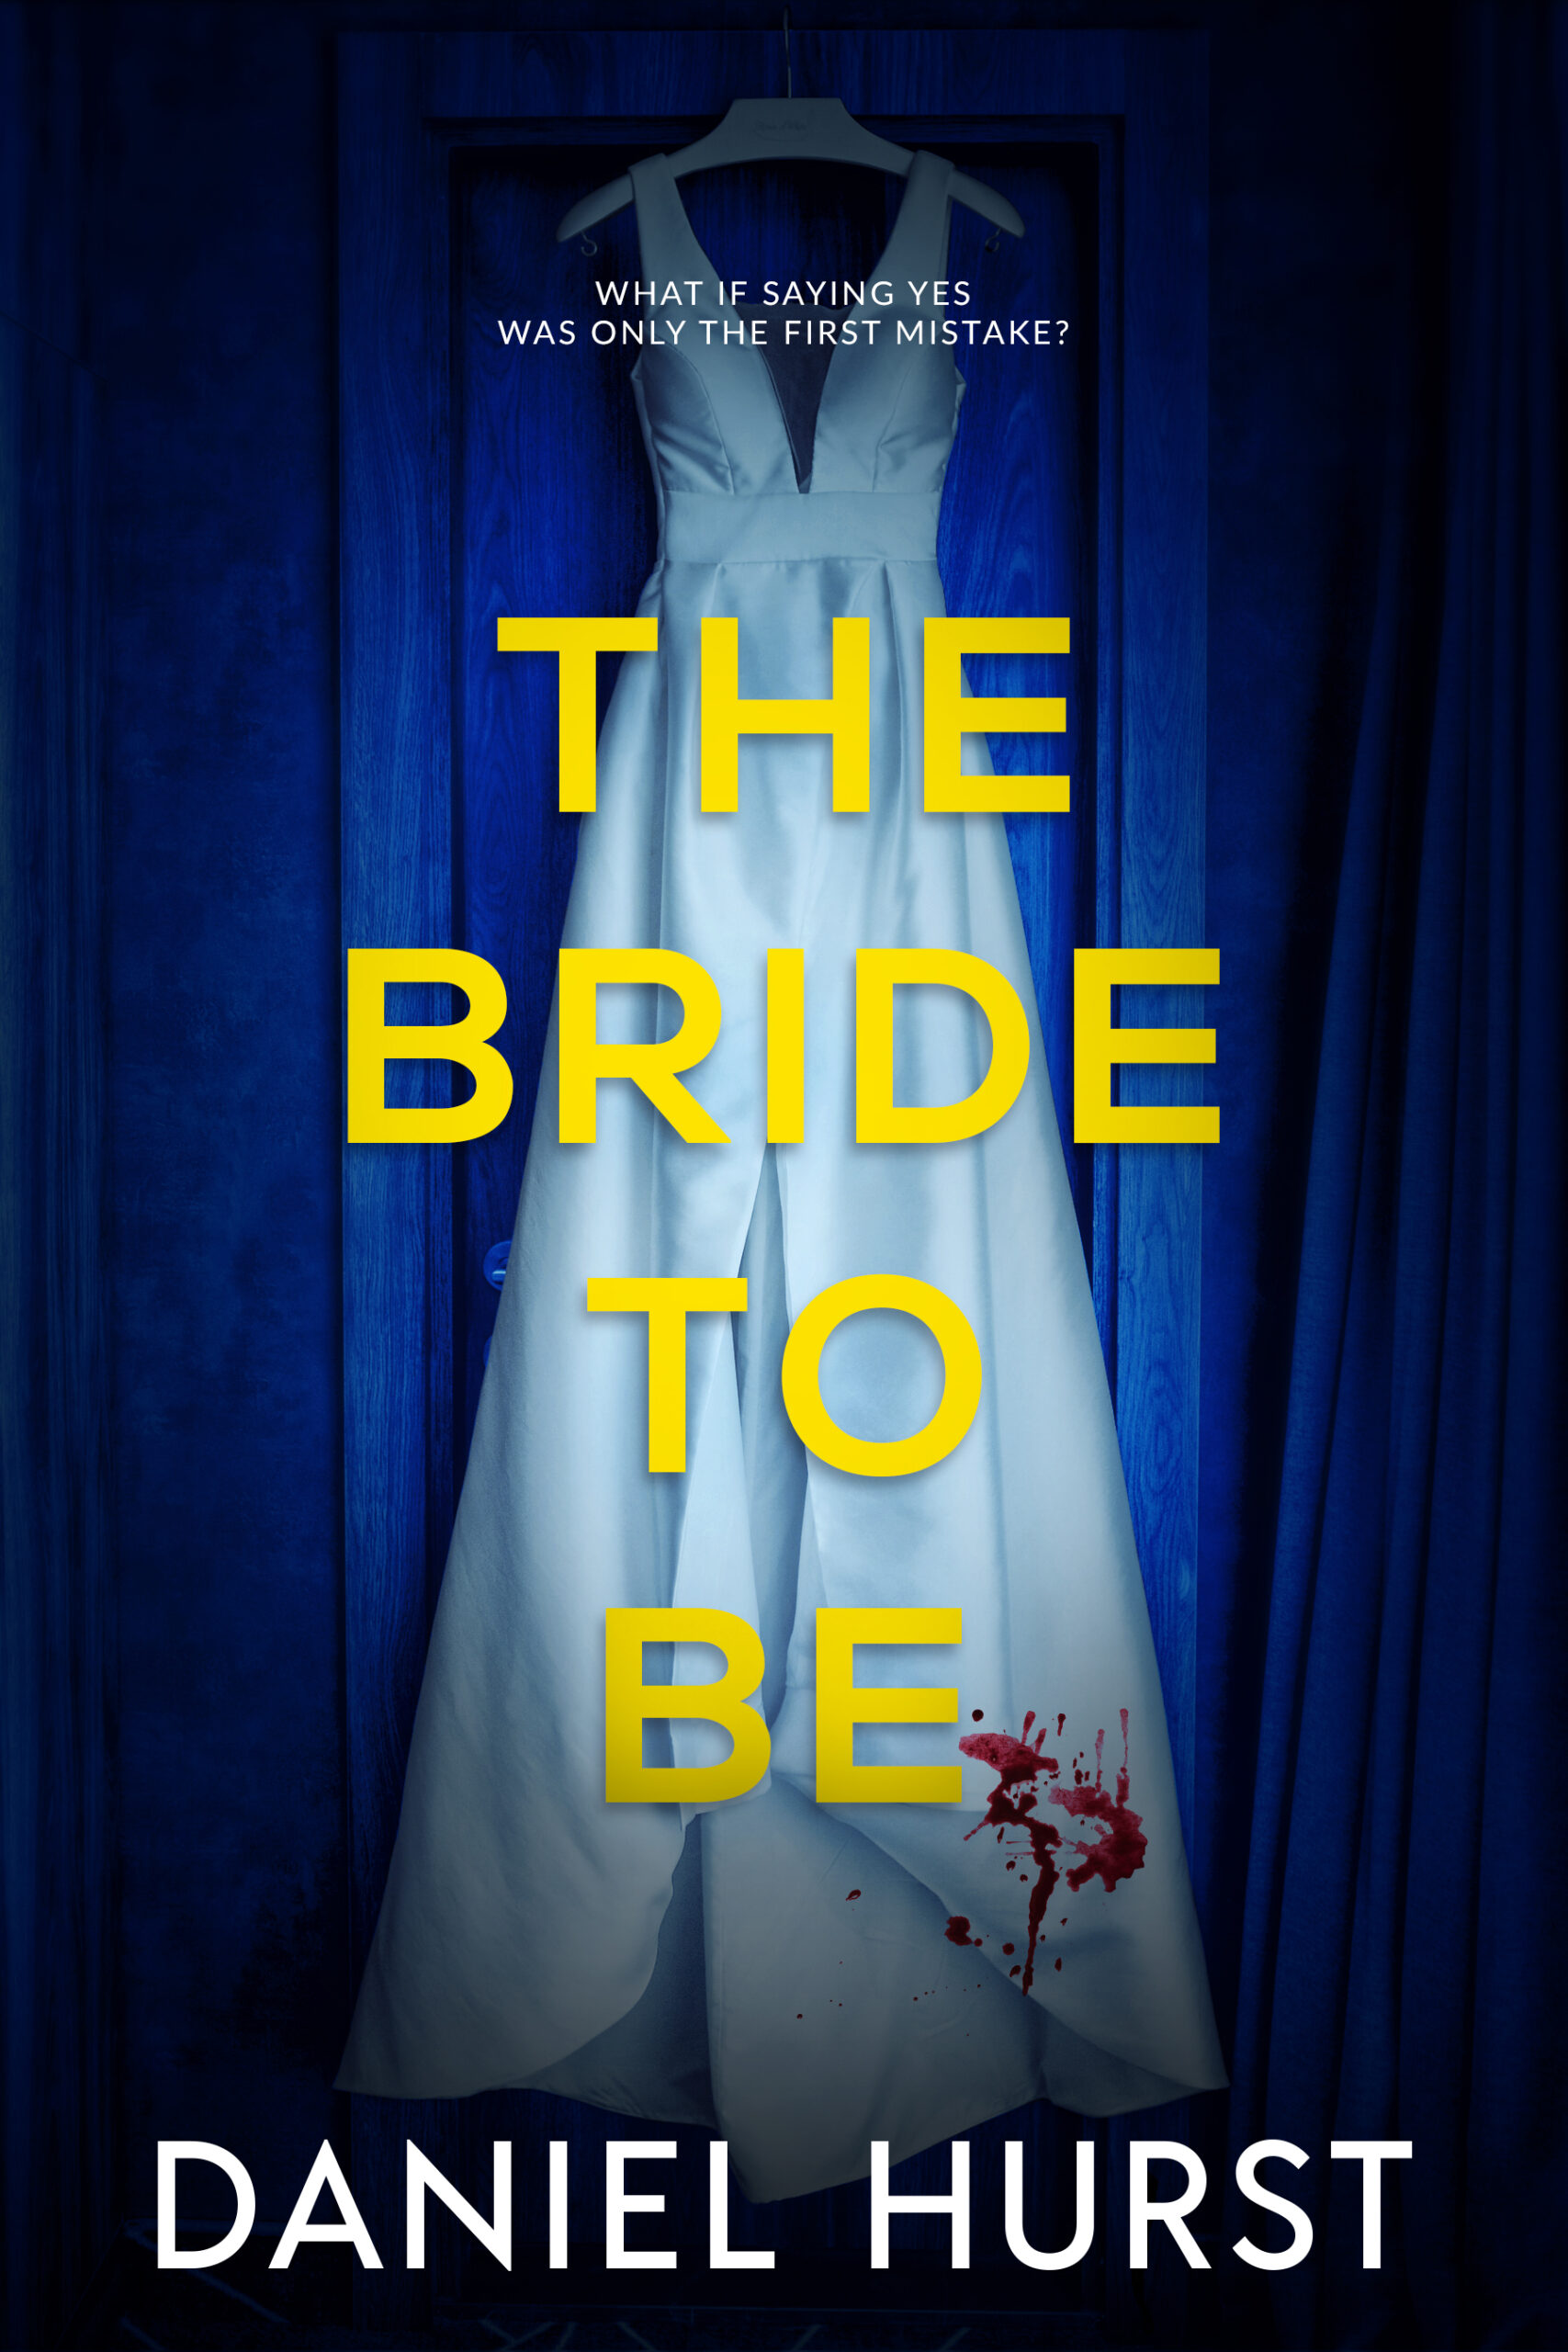 DANIEL HURST NEW RELEASE – THE BRIDE TO BE